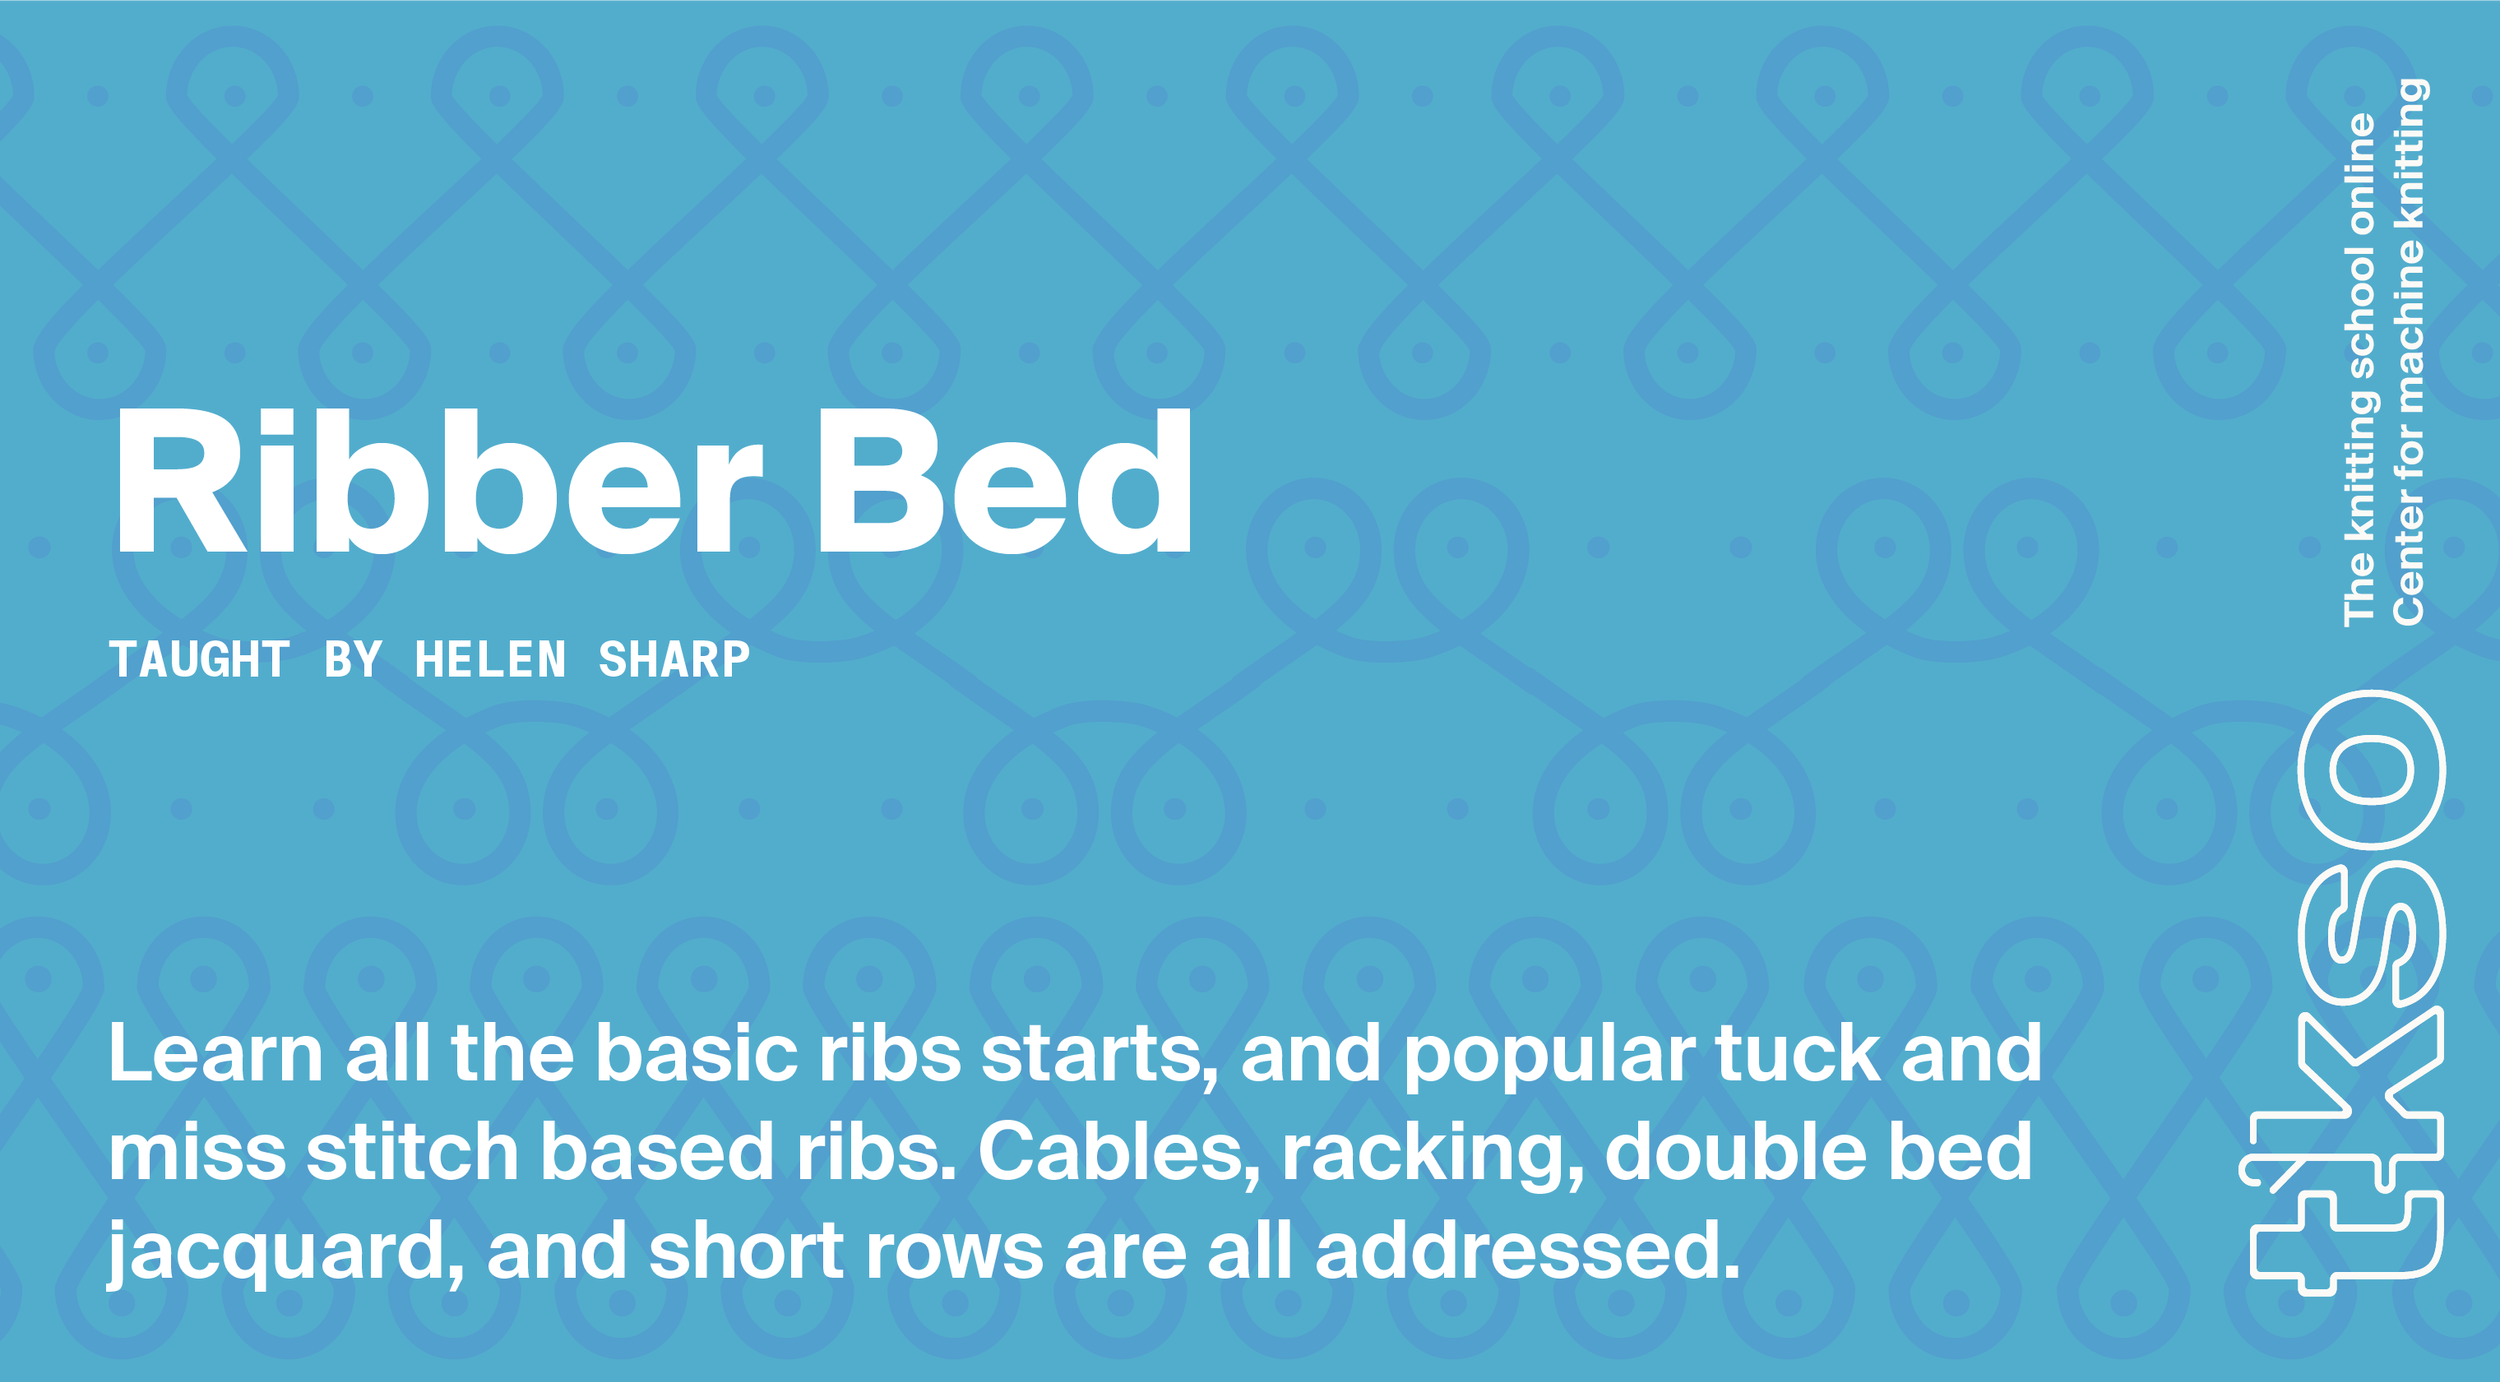 Knitting with the Ribber Bed (Copy)